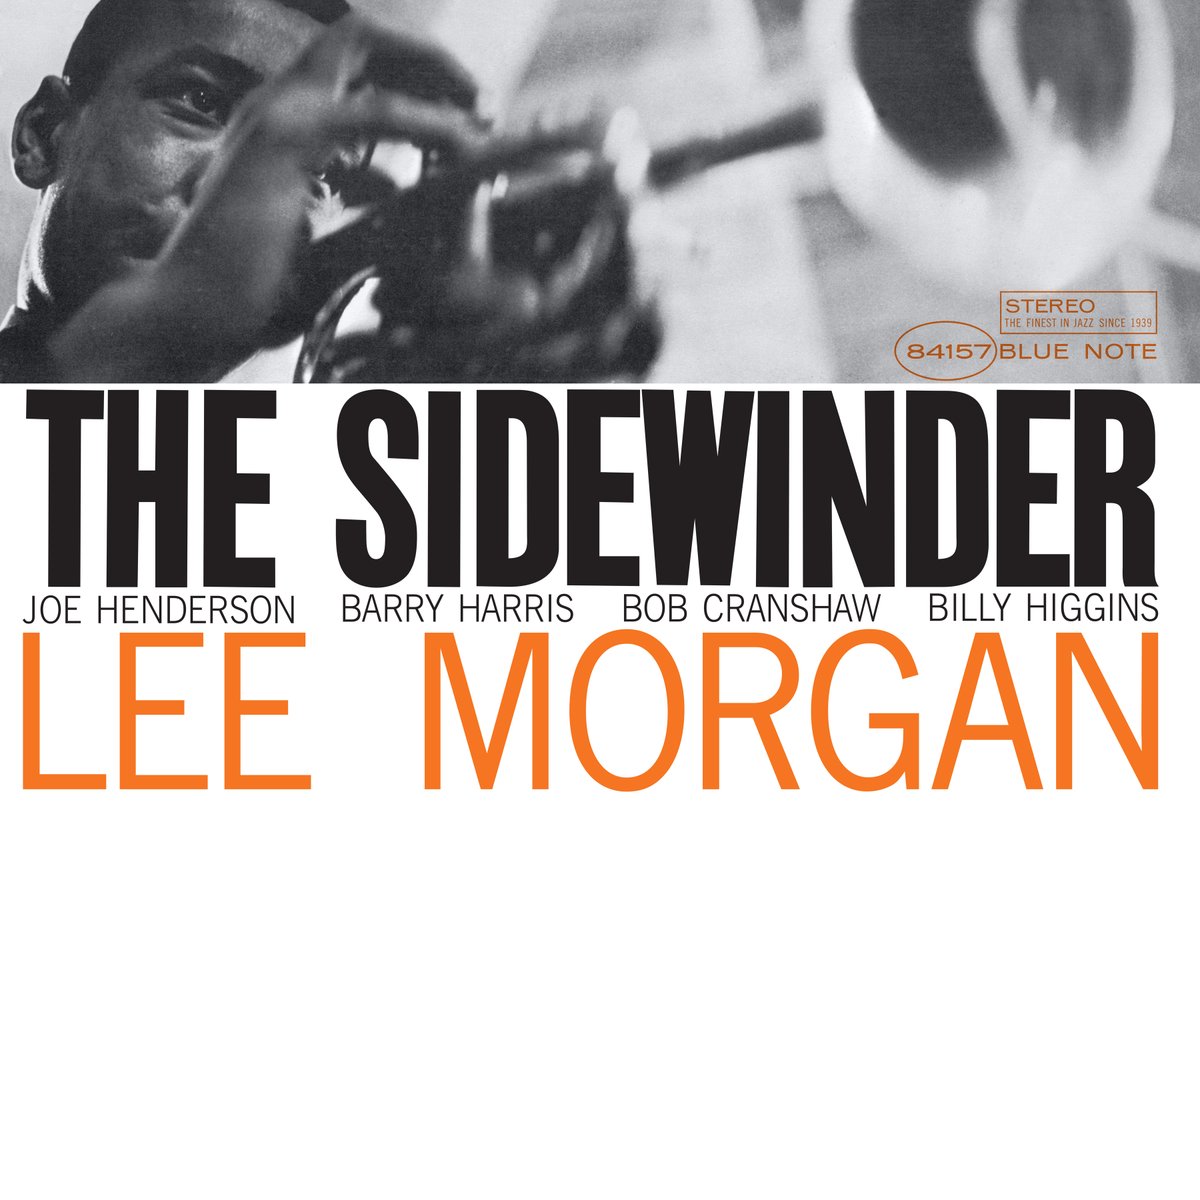 Trumpeter #LeeMorgan recorded his all-time classic 'The Sidewinder' 60 years ago #OTD on December 21, 1963 with Joe Henderson on tenor sax, Barry Harris on piano, Bob Cranshaw on bass & Billy Higgins on drums. Get the Classic Vinyl Edition or listen now: bluenote.lnk.to/LeeMorgan-TheS…